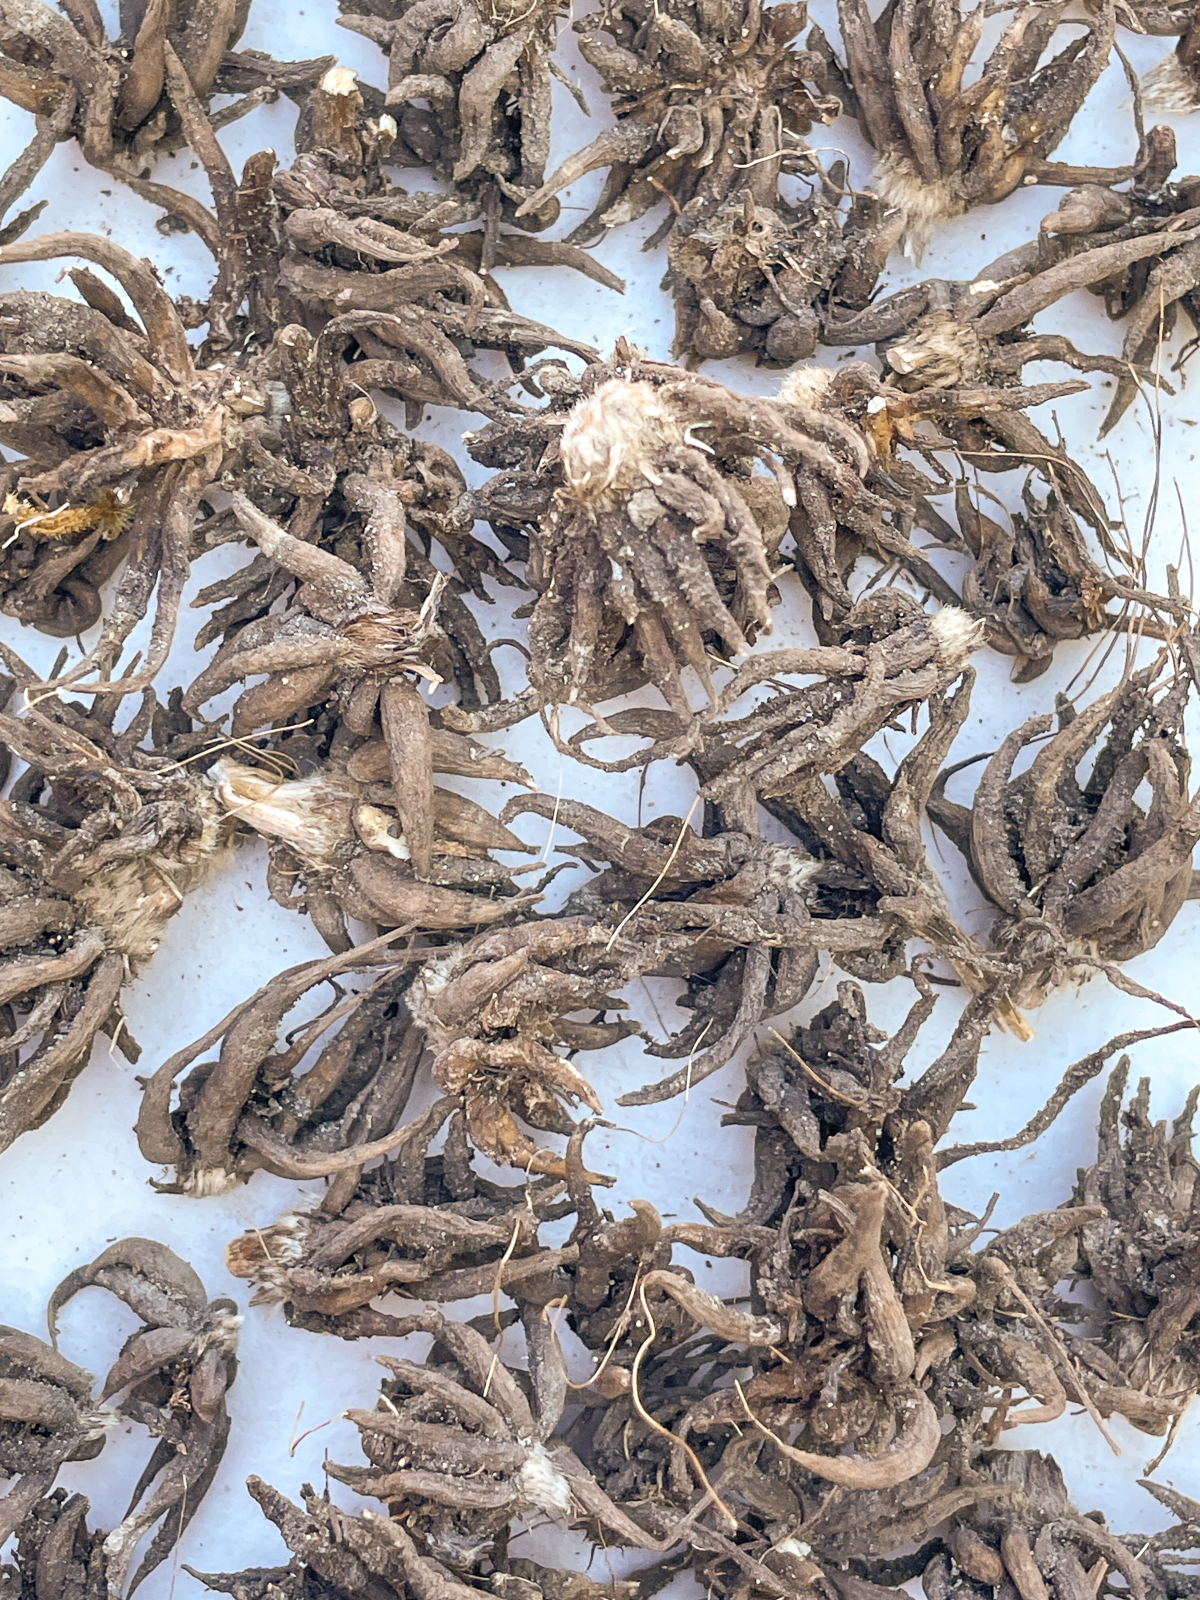 ranunculus corms cleaned, separated and ready for storage